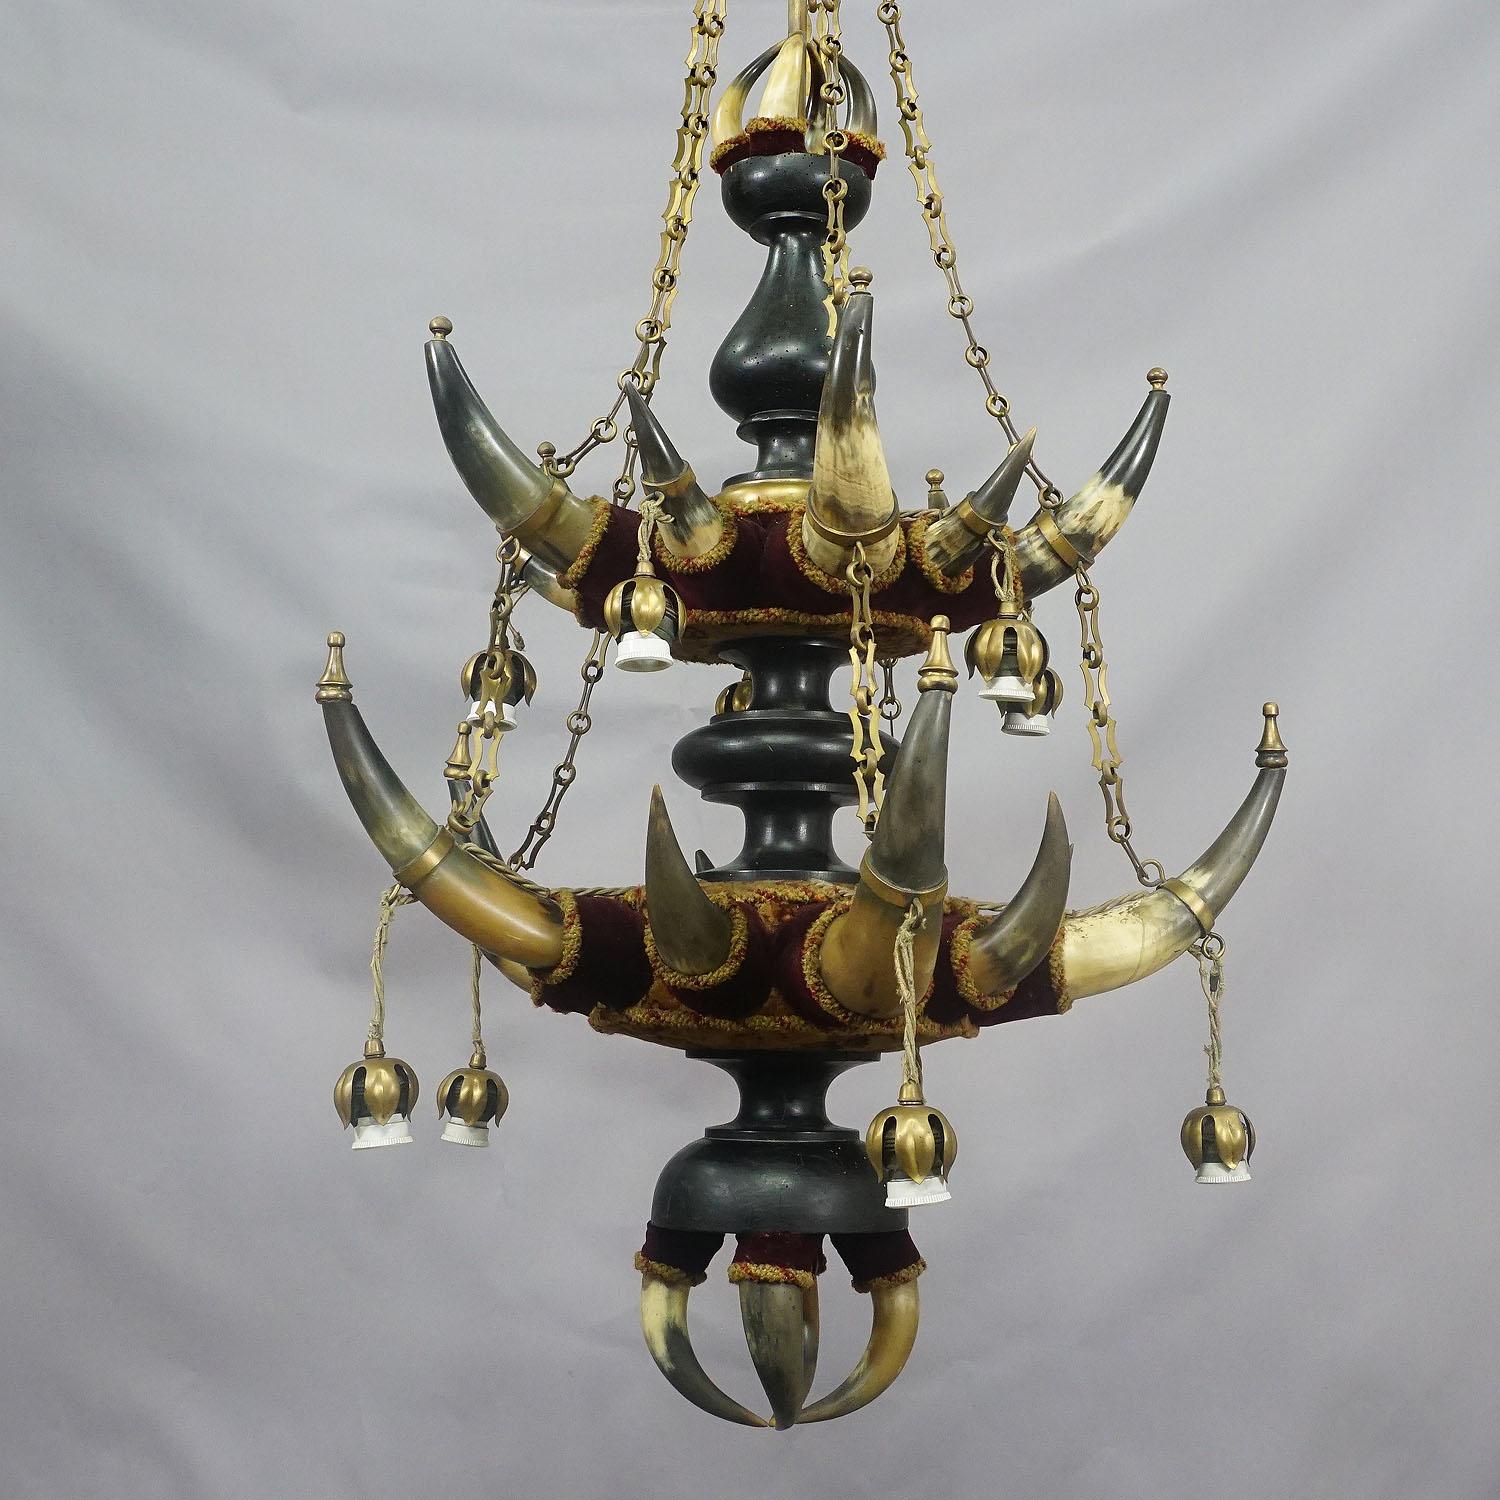 Wood Antique Ceiling Lamp with Cattle Horns, Austria, circa 1880 For Sale